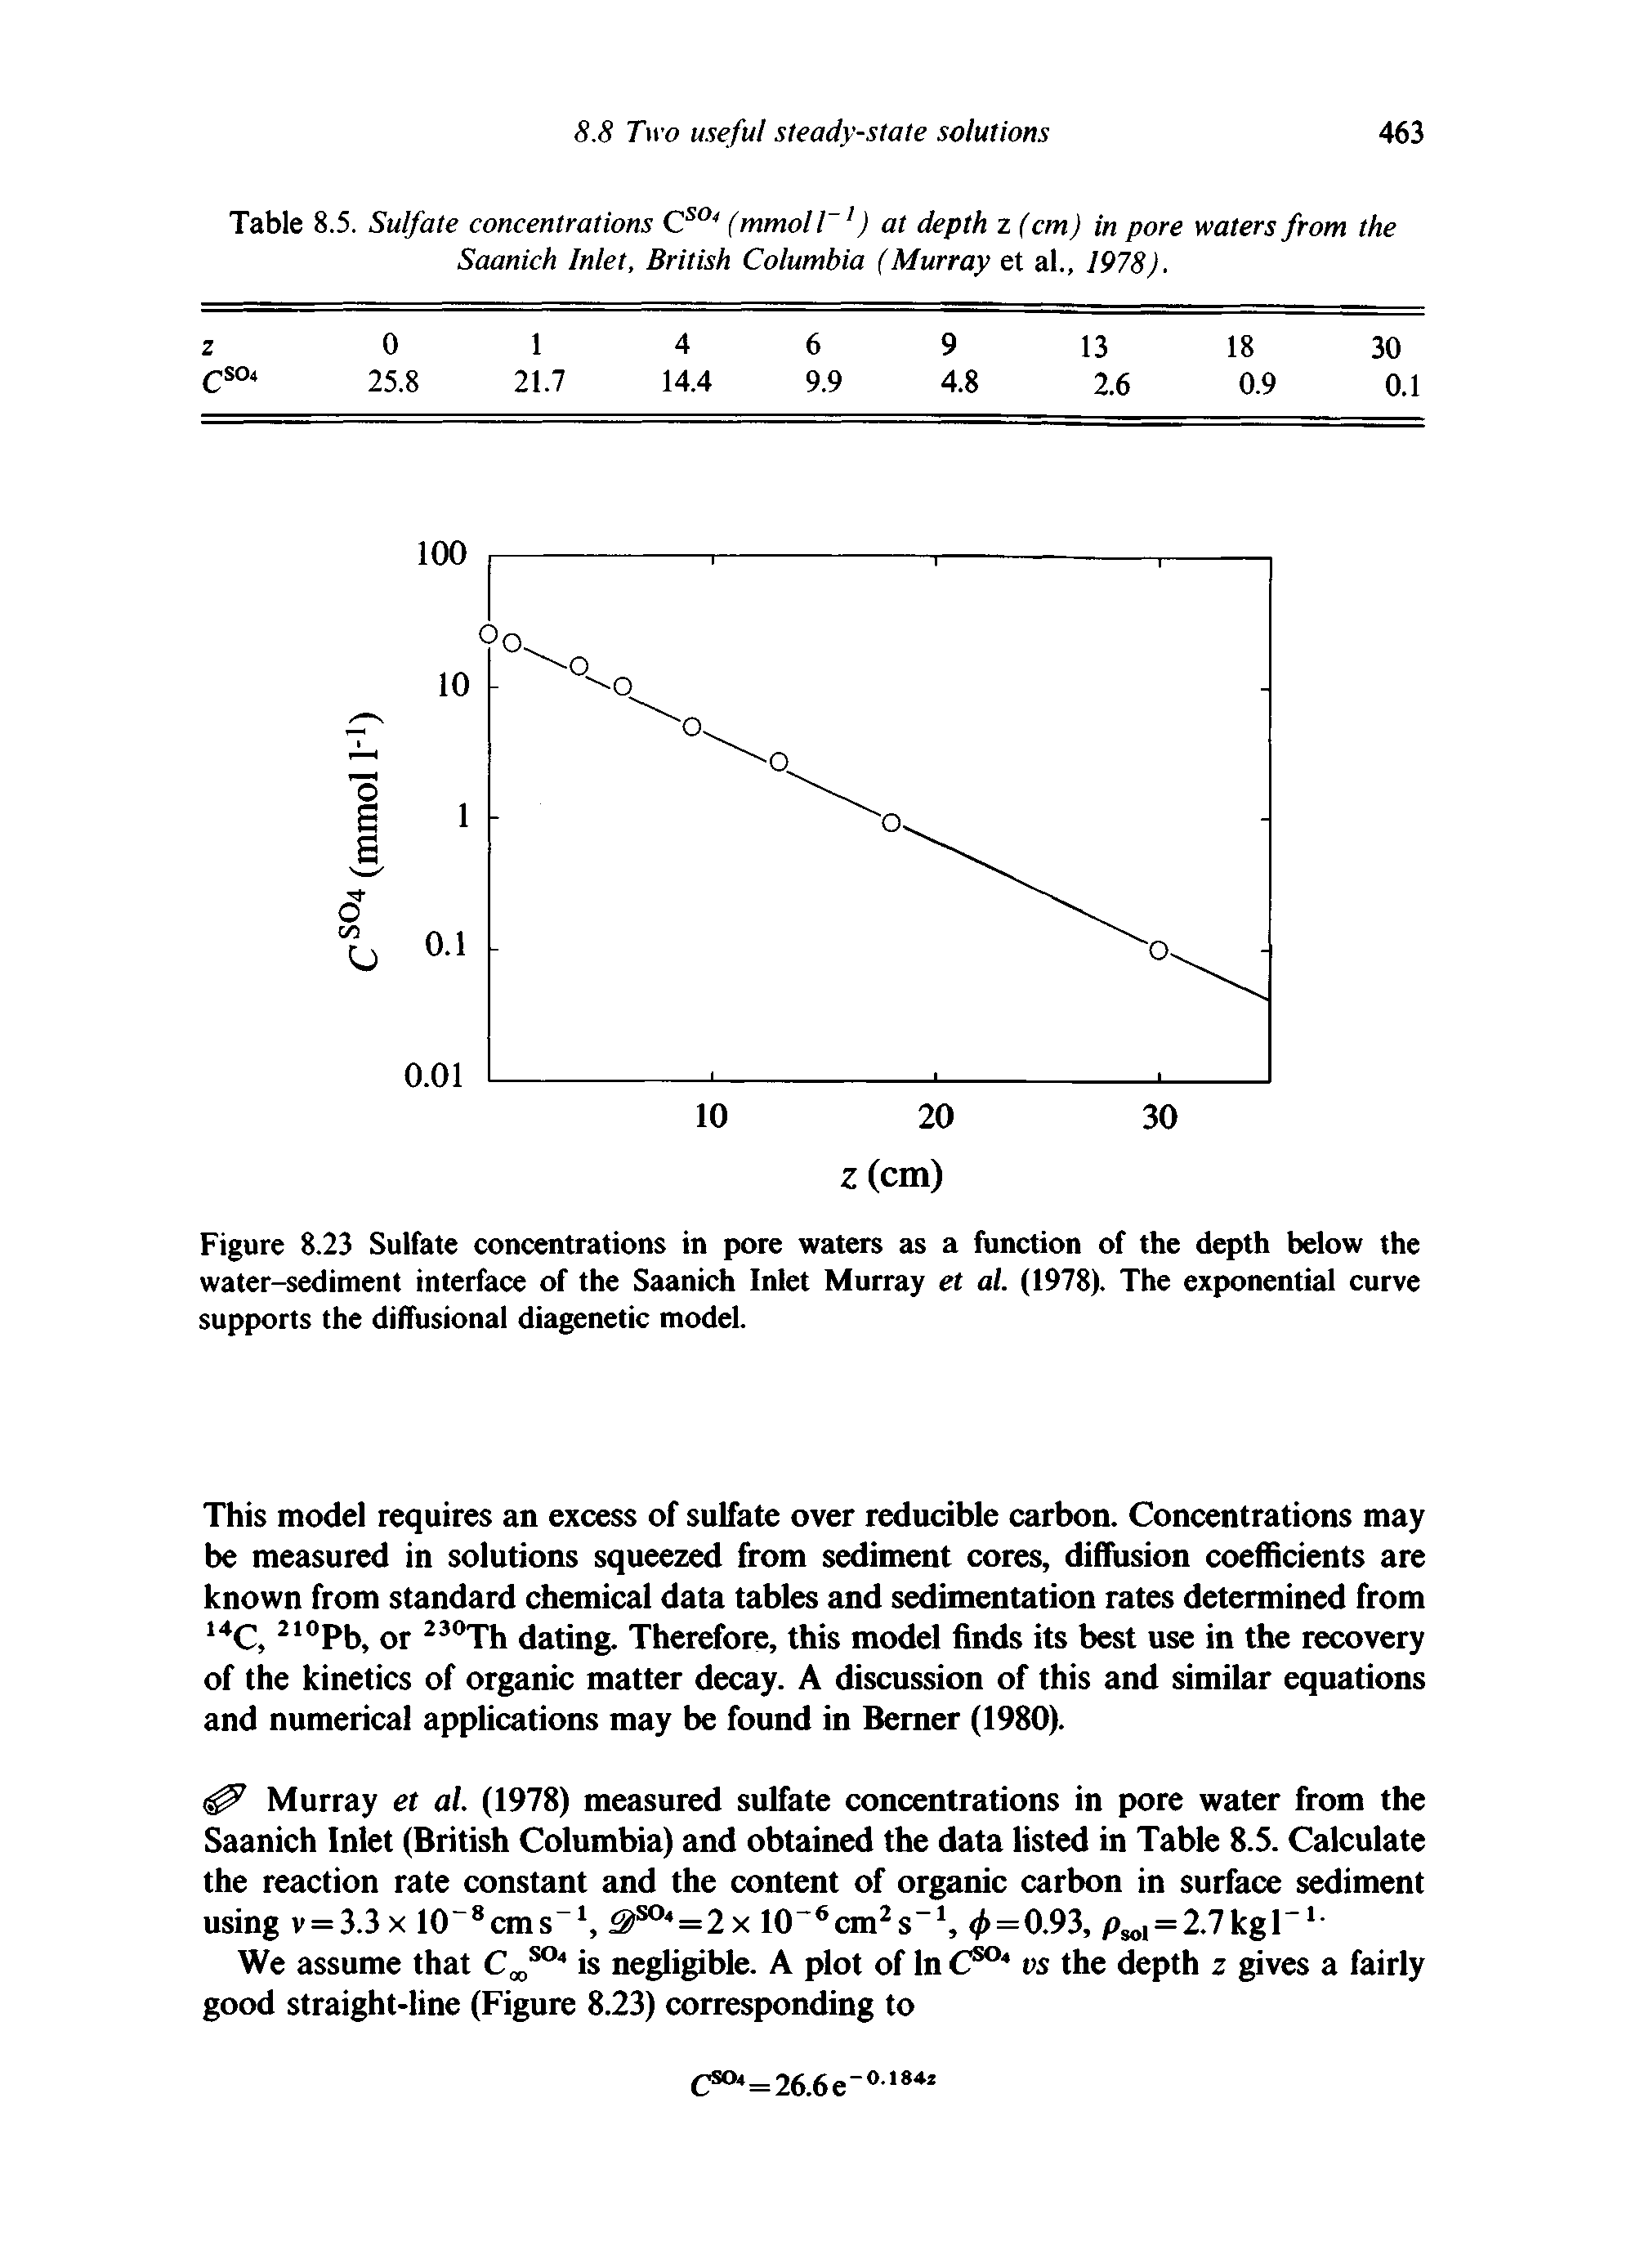 Figure 8.23 Sulfate concentrations in pore waters as a function of the depth below the water-sediment interface of the Saanich Inlet Murray et al. (1978). The exponential curve supports the diffusional diagenetic model.